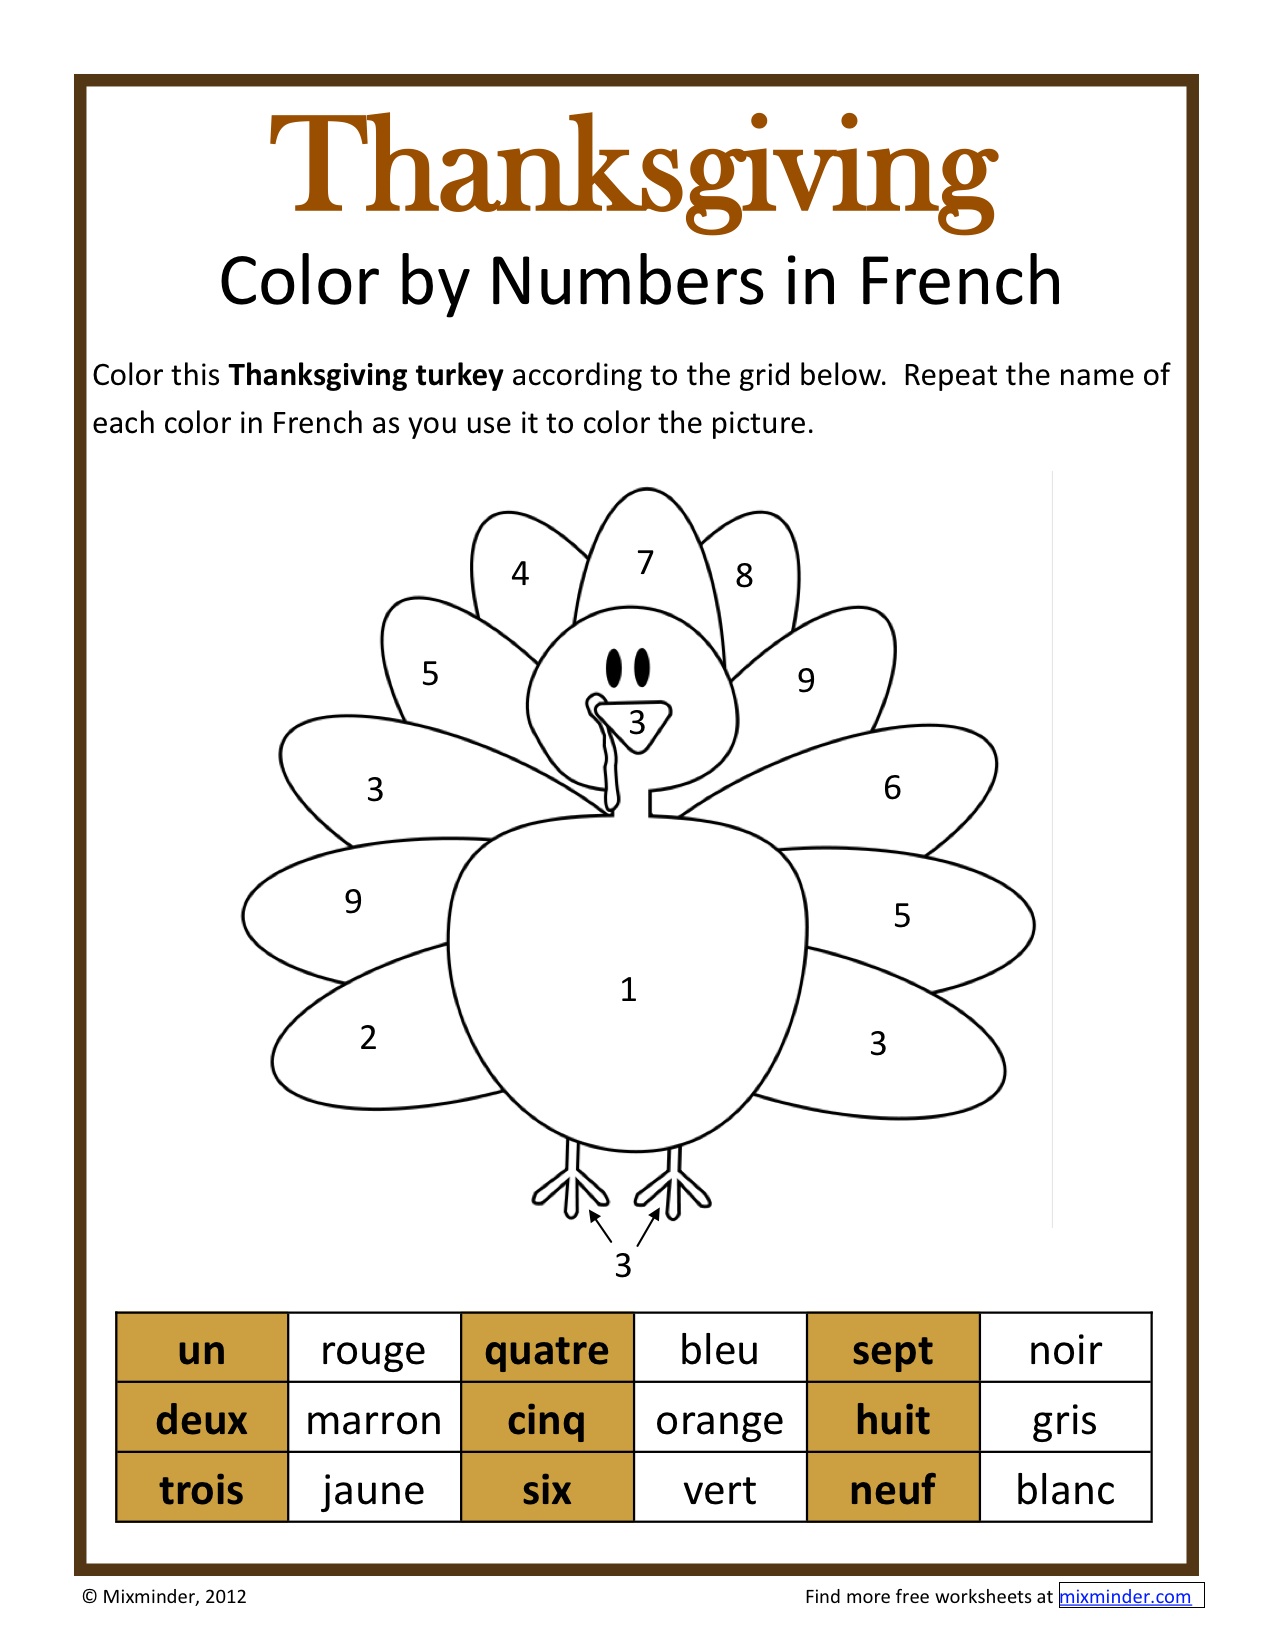 Thanksgiving Color by Numbers in French